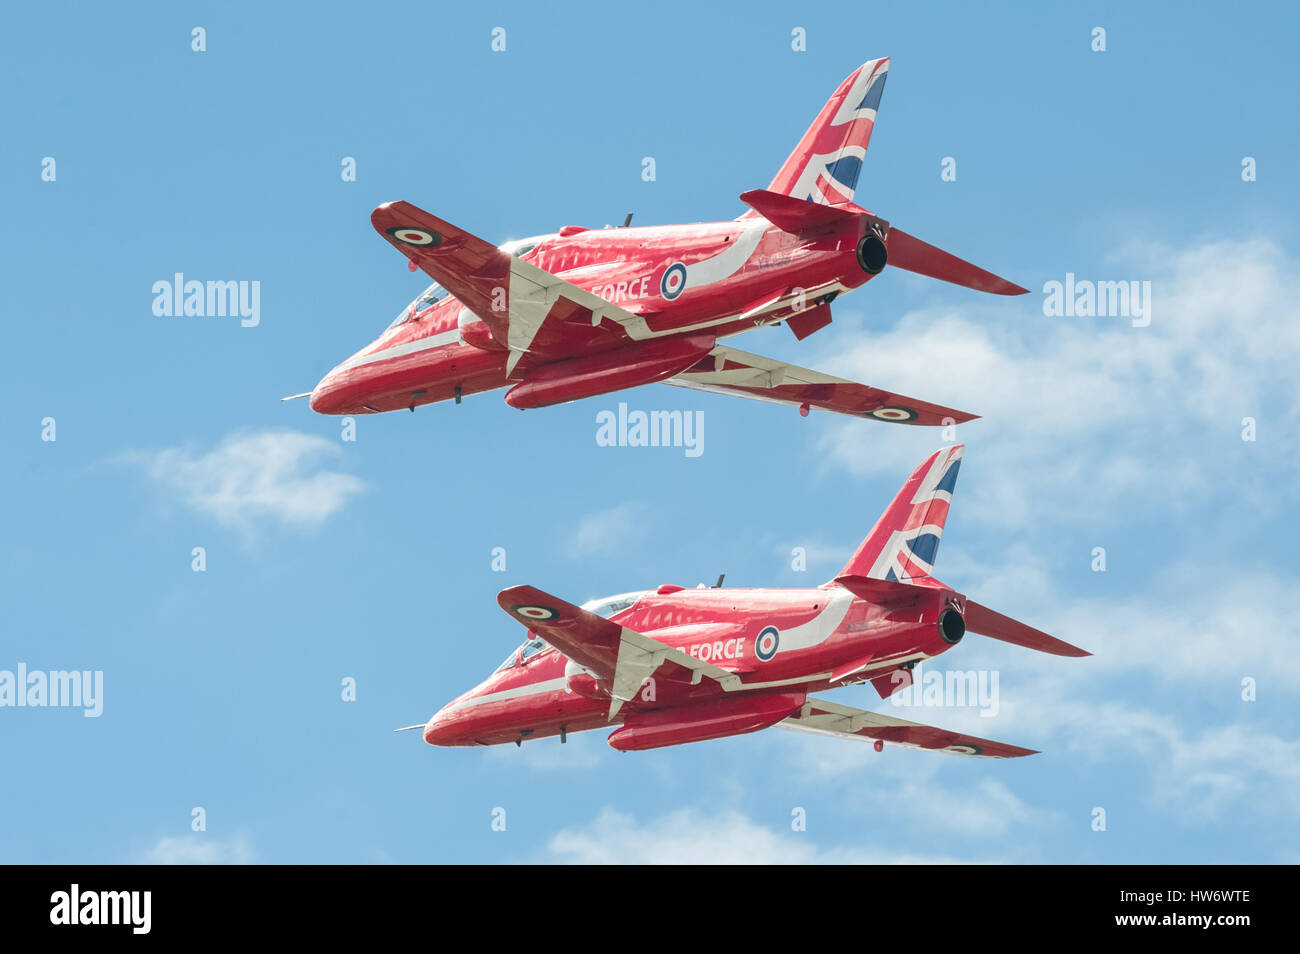 Low-level flypast by the Red Arrows aerobatic display team at an aviation trade event at Farnborough, UK Stock Photo